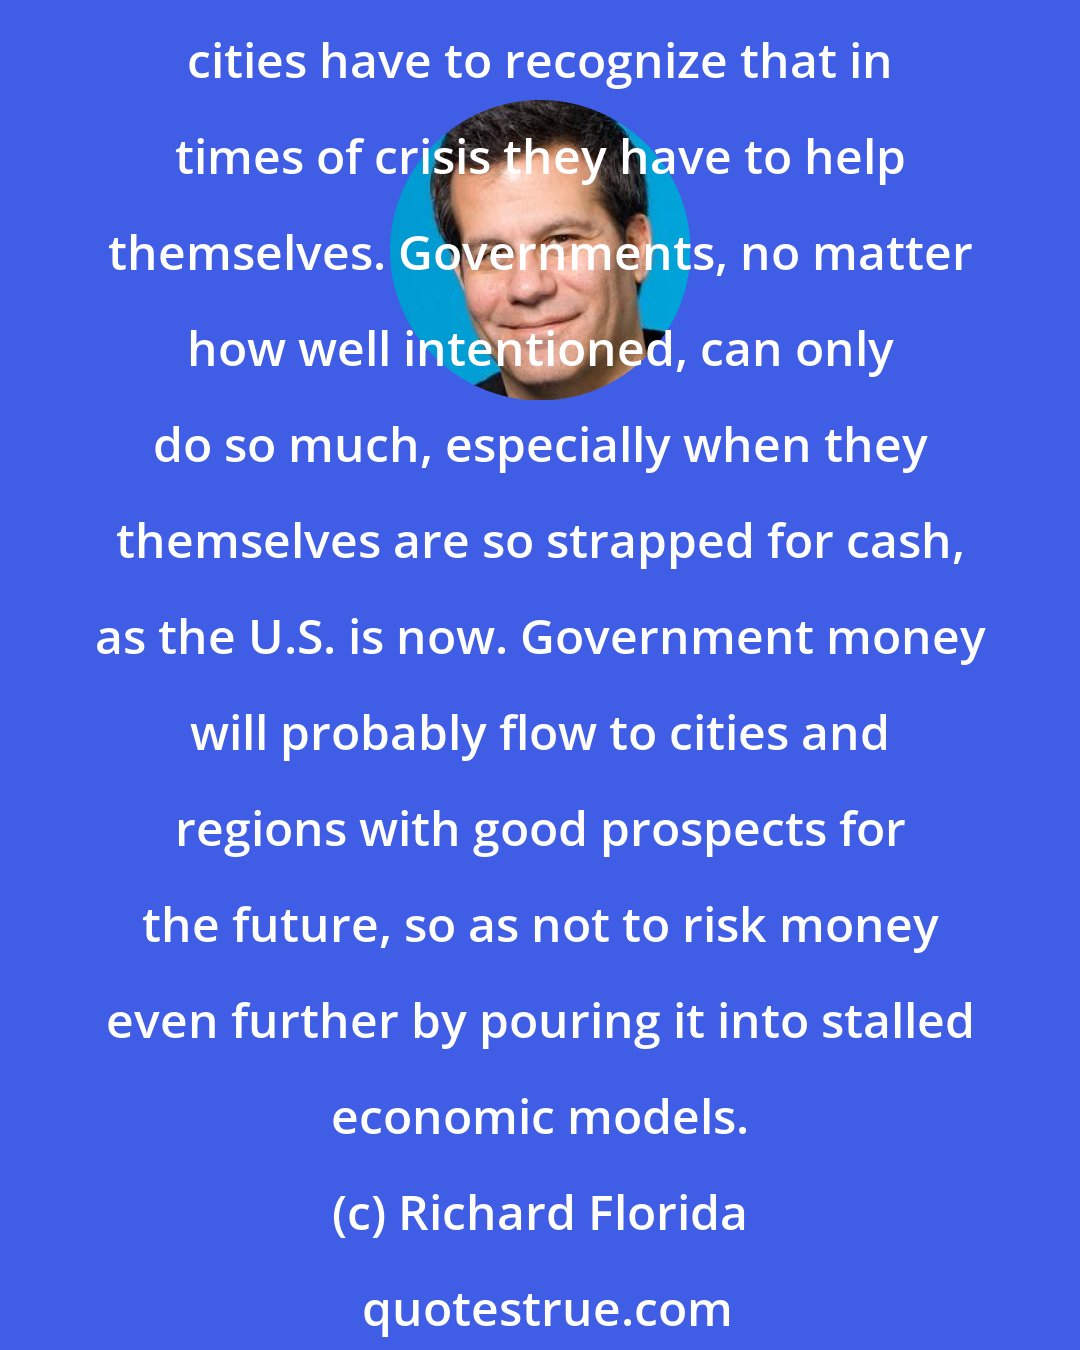 Richard Florida: There's no getting around the fact that some cities face long odds, and governments and societies are going to be confronted with some hard decisions. Most importantly, cities have to recognize that in times of crisis they have to help themselves. Governments, no matter how well intentioned, can only do so much, especially when they themselves are so strapped for cash, as the U.S. is now. Government money will probably flow to cities and regions with good prospects for the future, so as not to risk money even further by pouring it into stalled economic models.